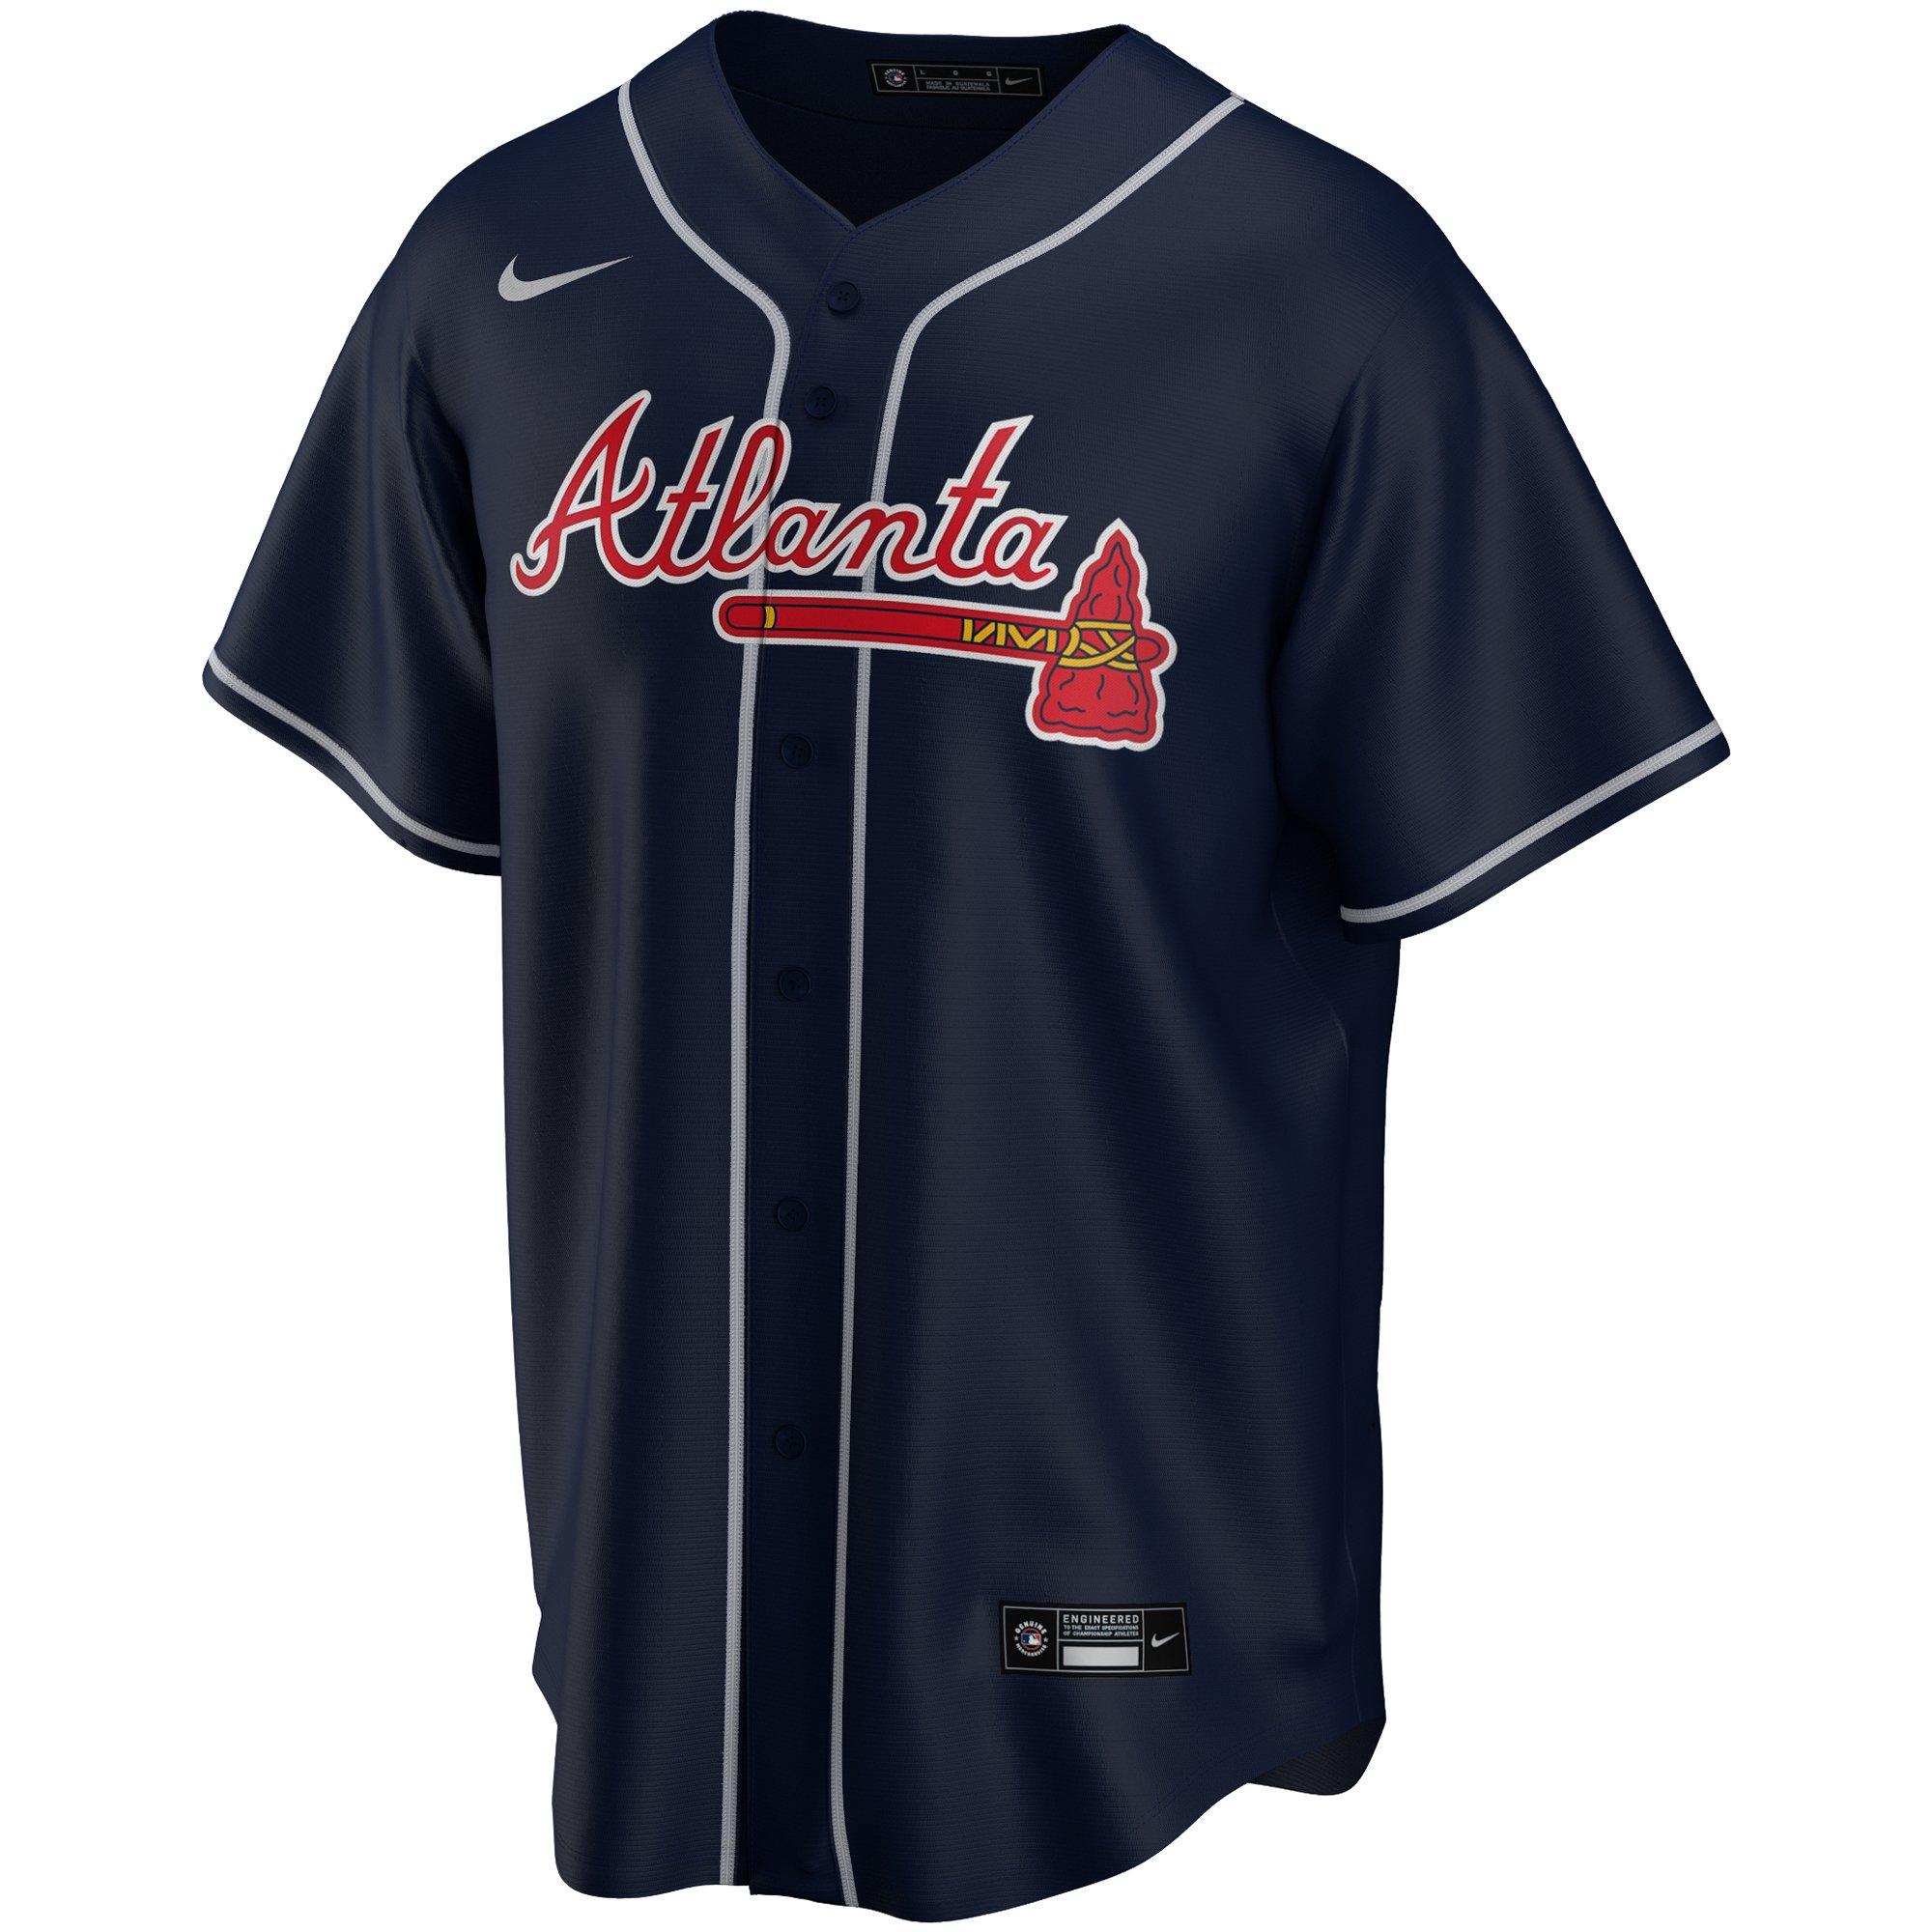 braves gear for sale